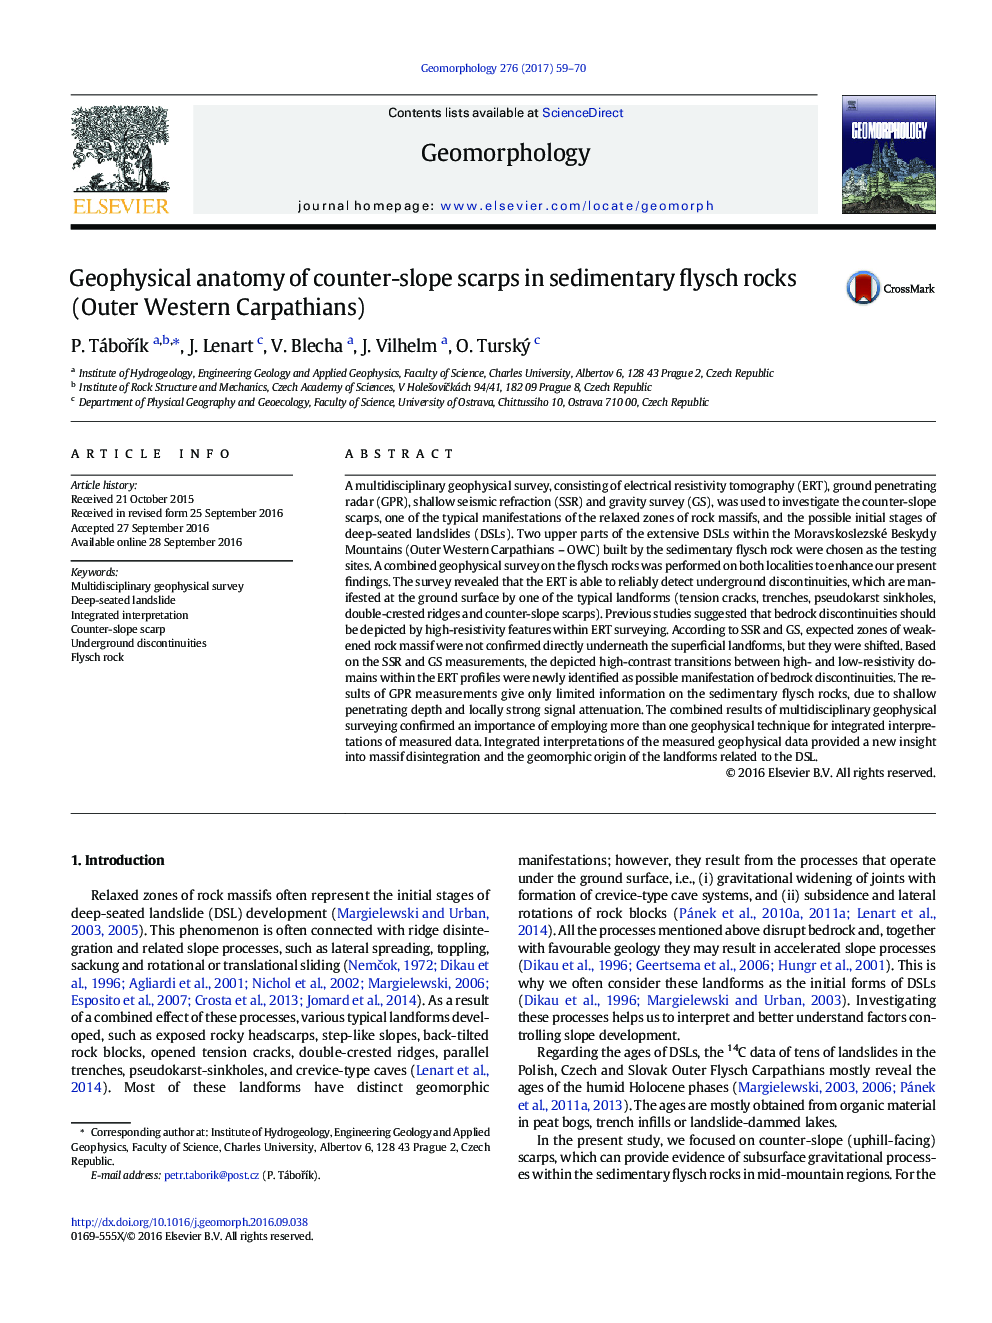 Geophysical anatomy of counter-slope scarps in sedimentary flysch rocks (Outer Western Carpathians)